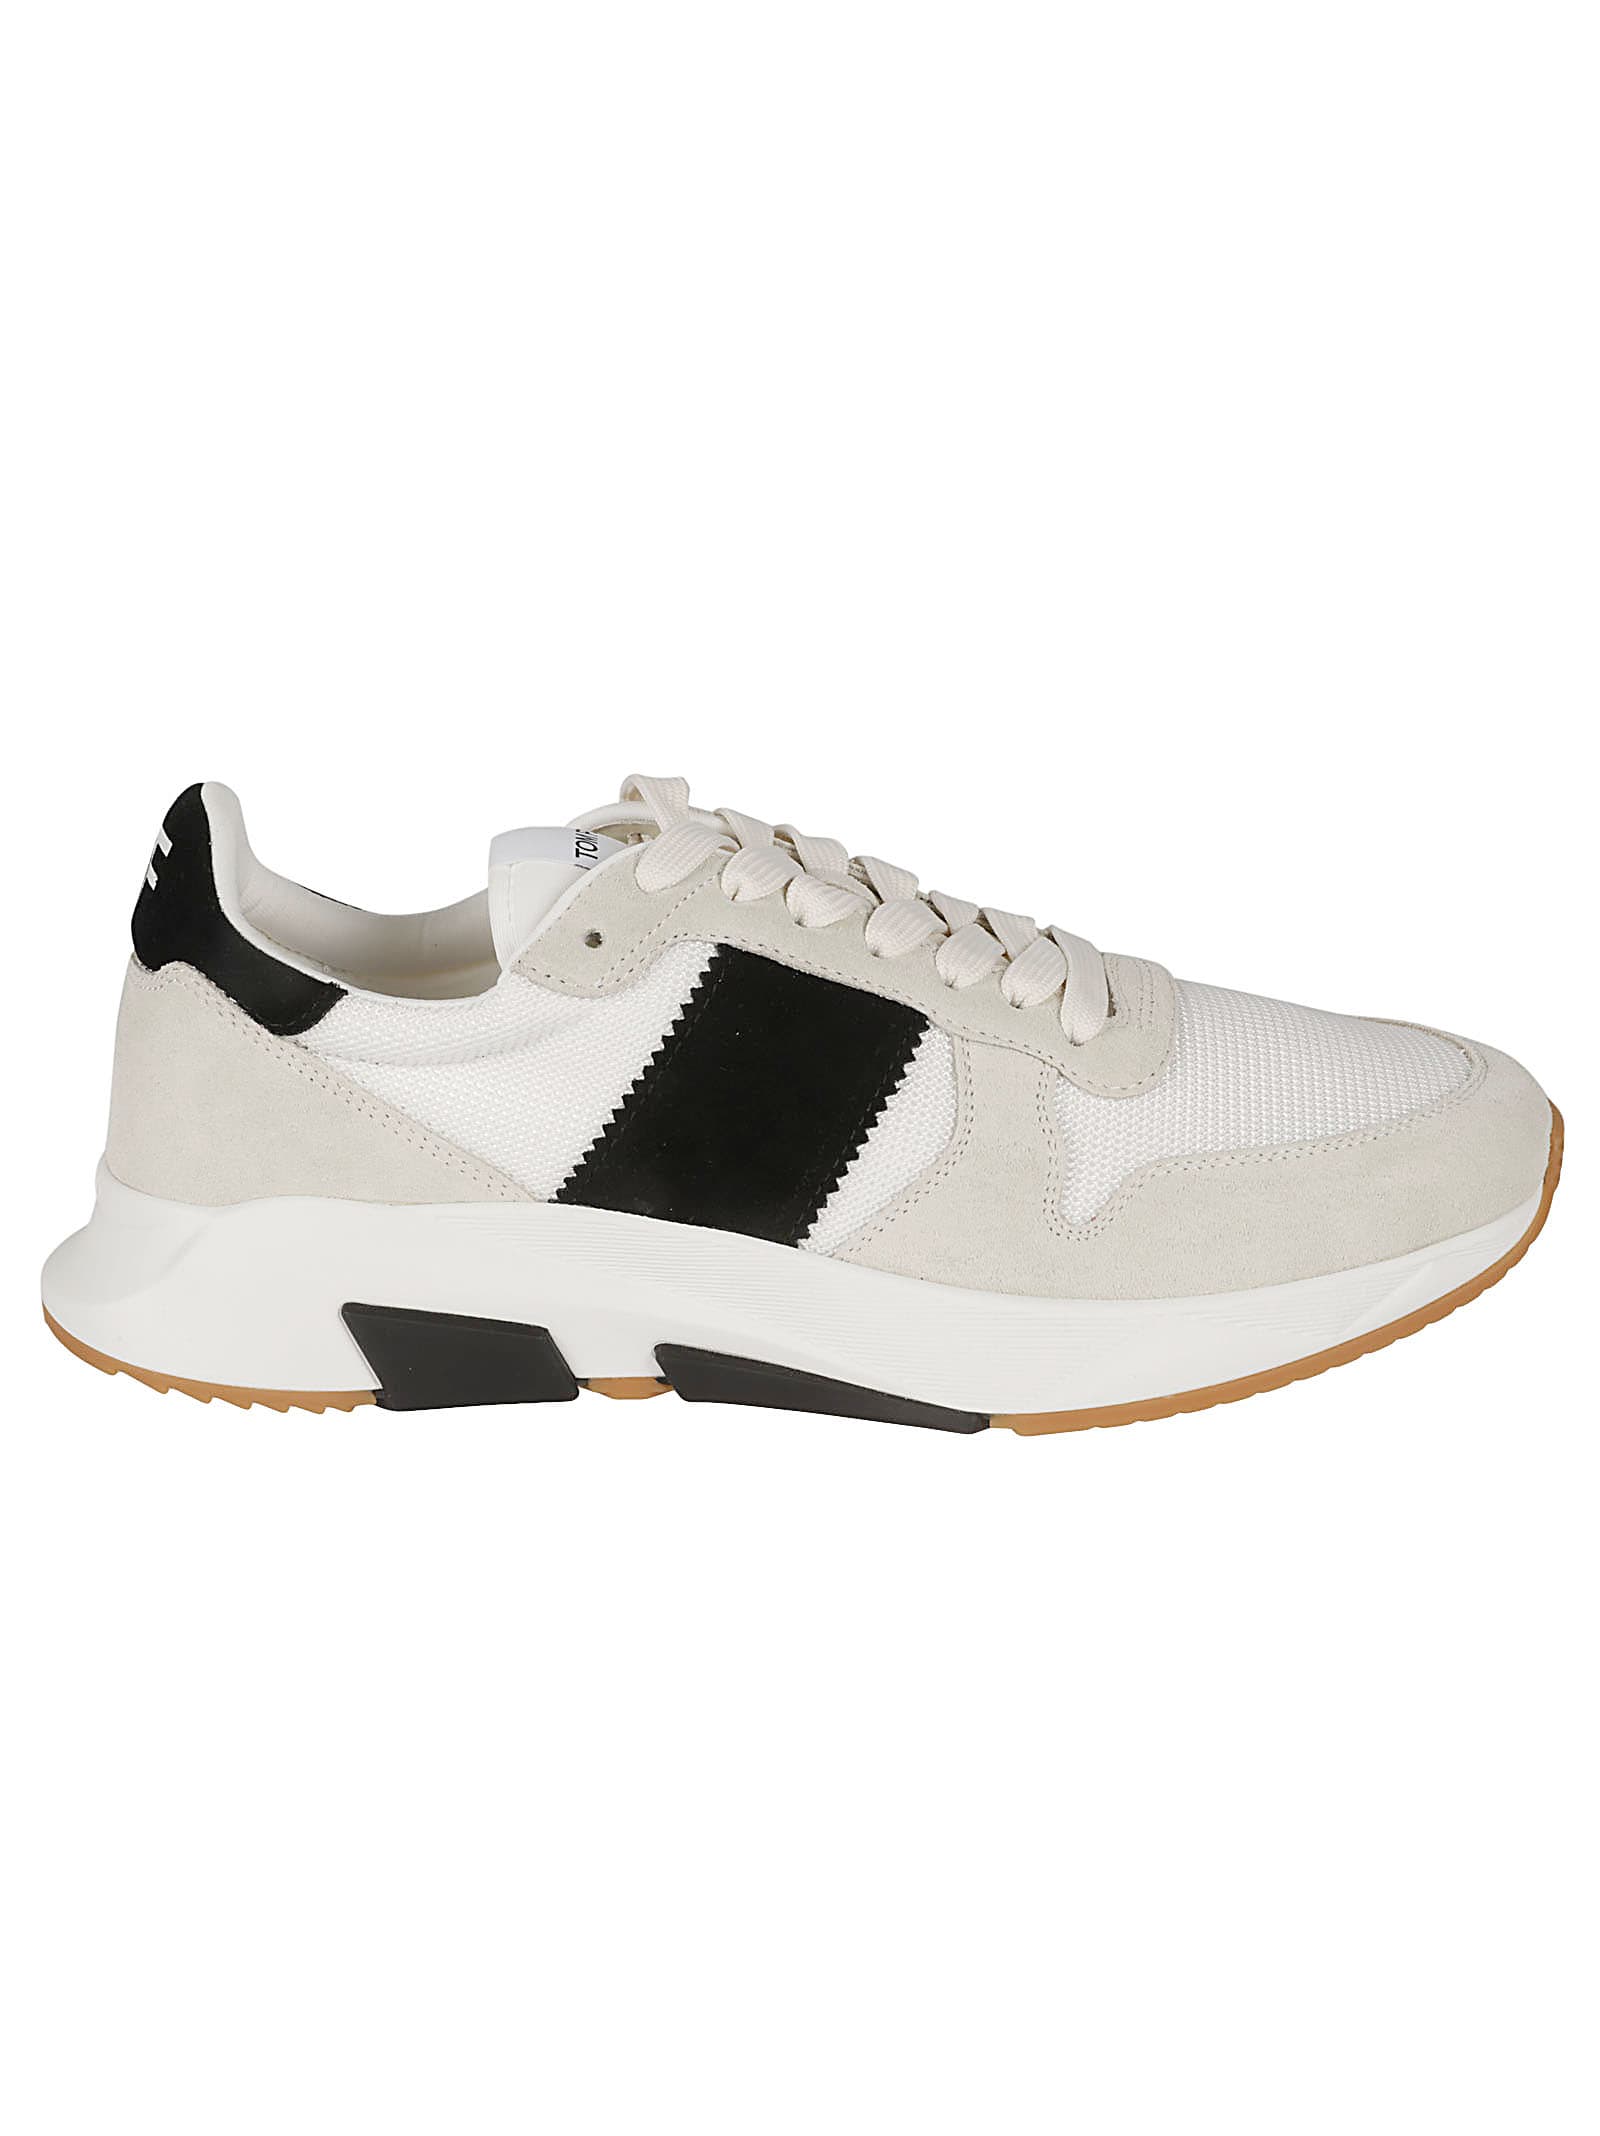 TOM FORD BACK LOCK LACE-UP SNEAKERS